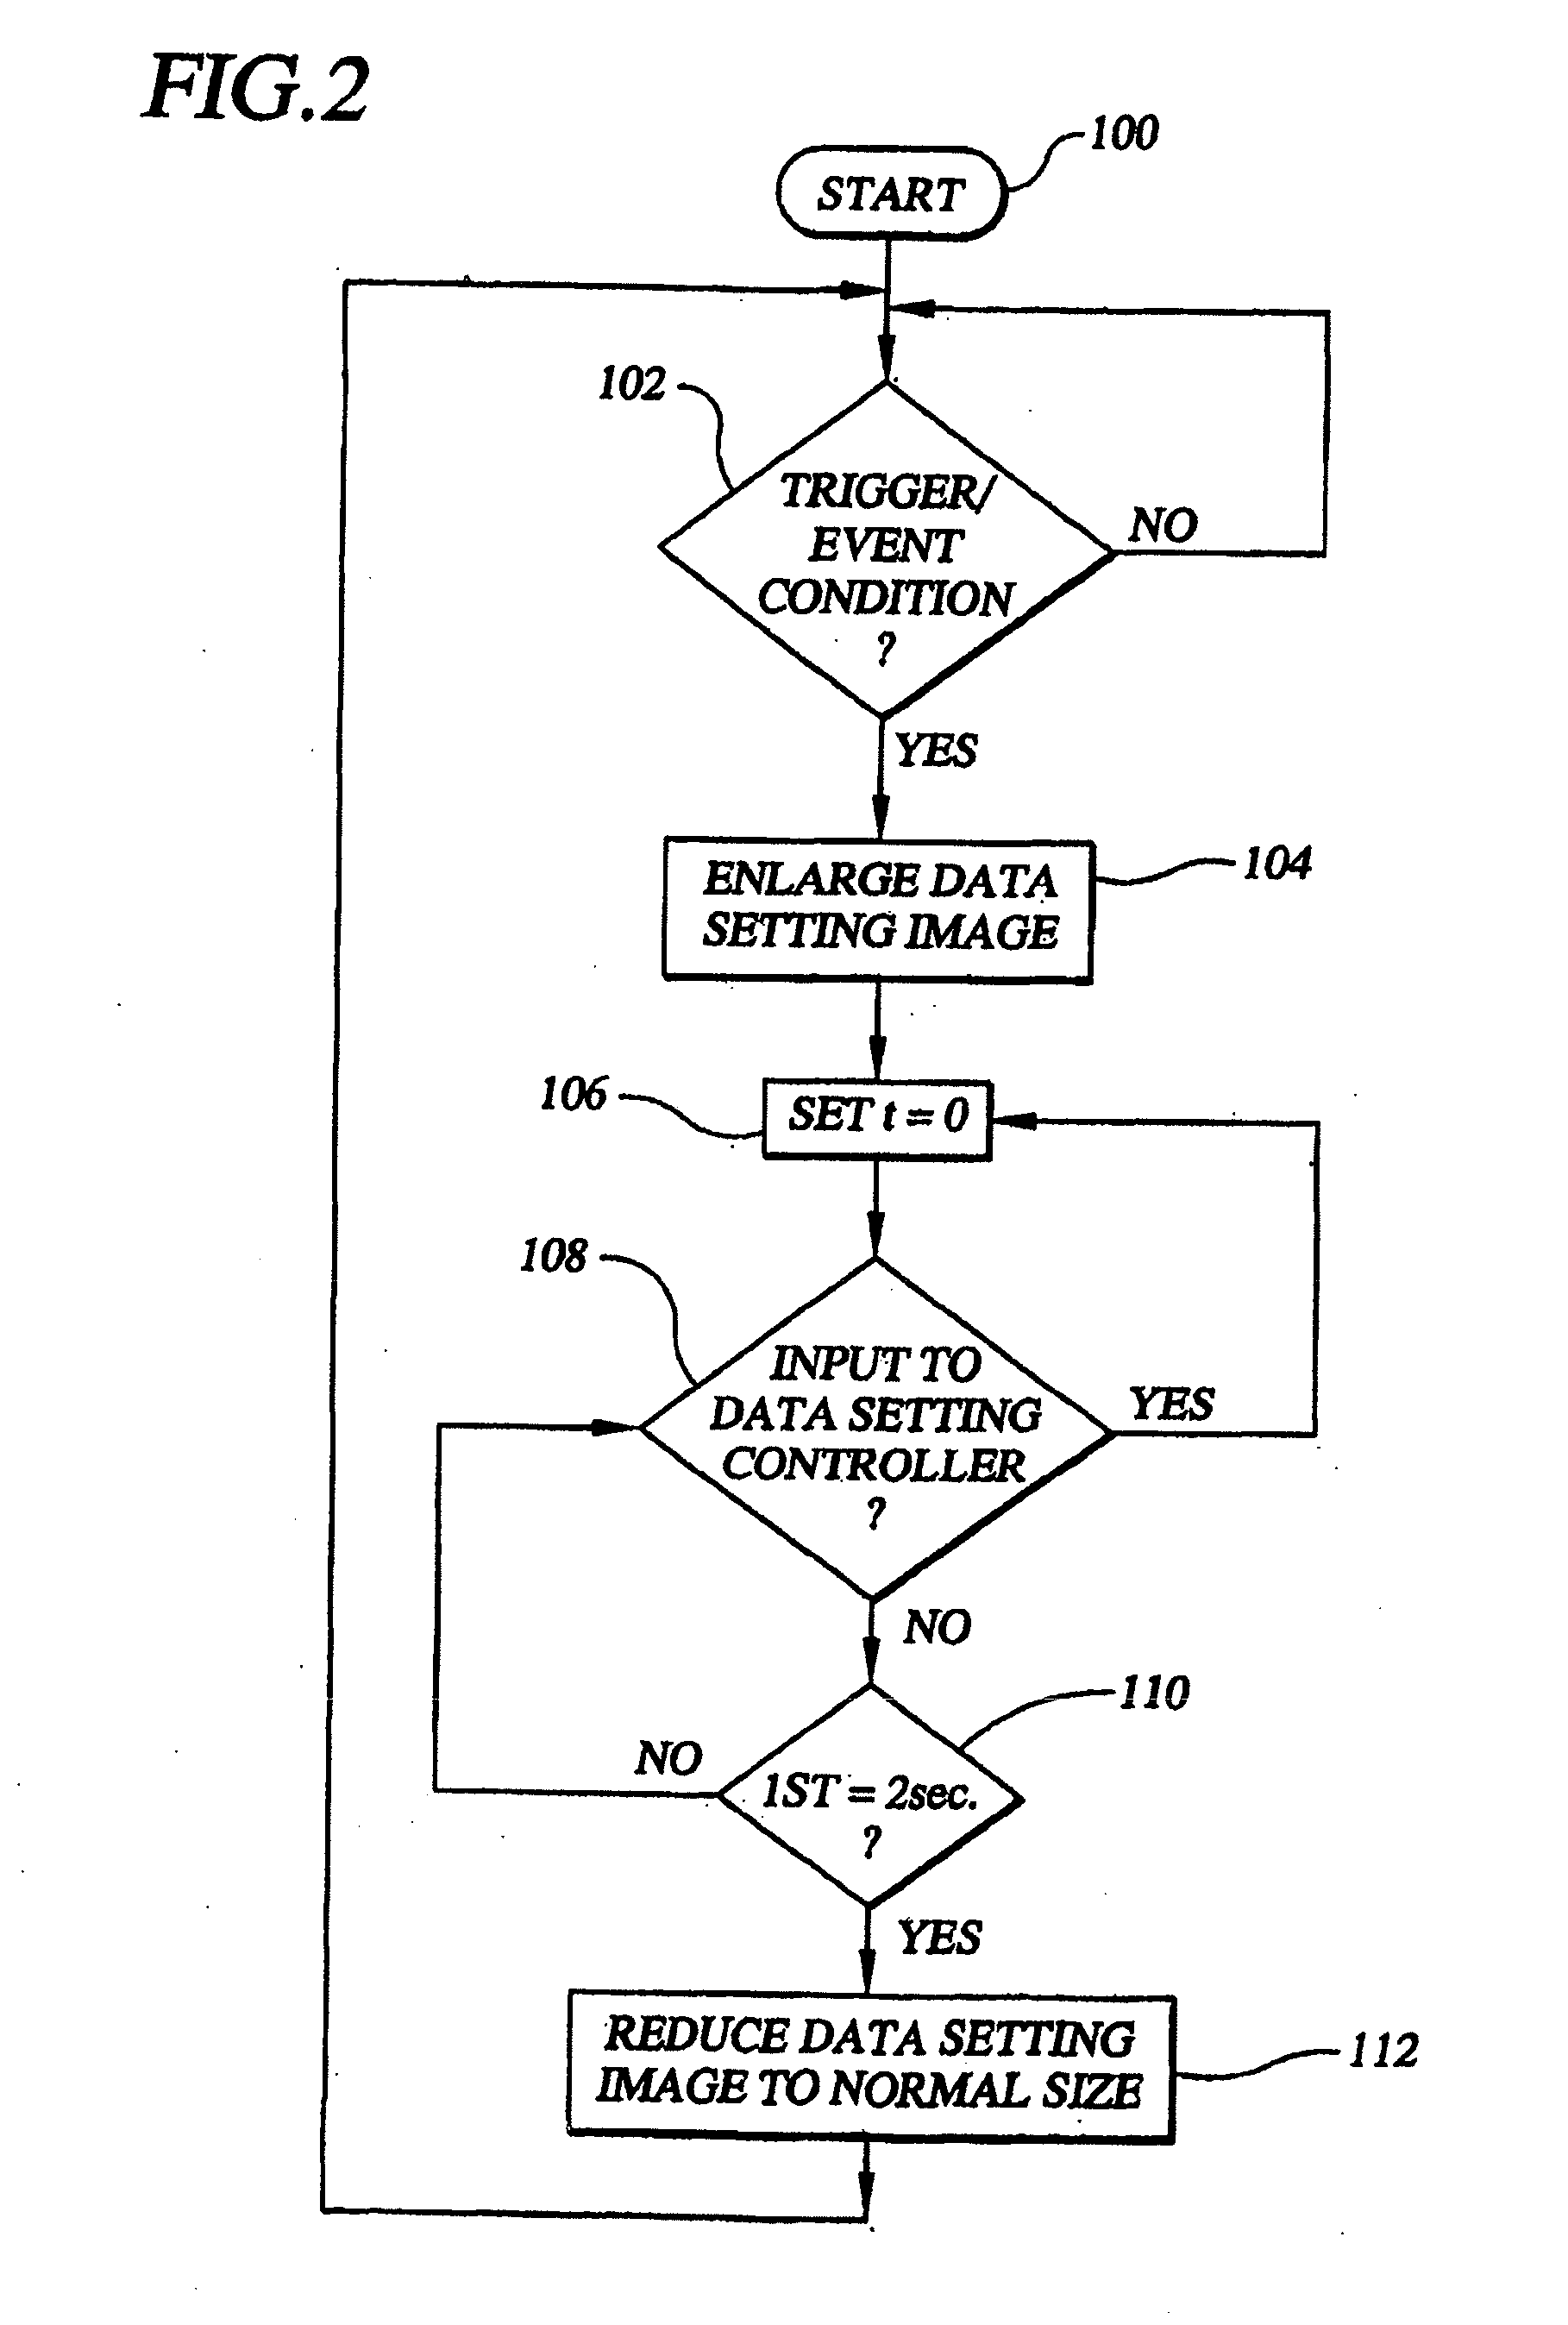 Method and System for Highlighting an Image Representative of a Flight Parameter of an Aircraft